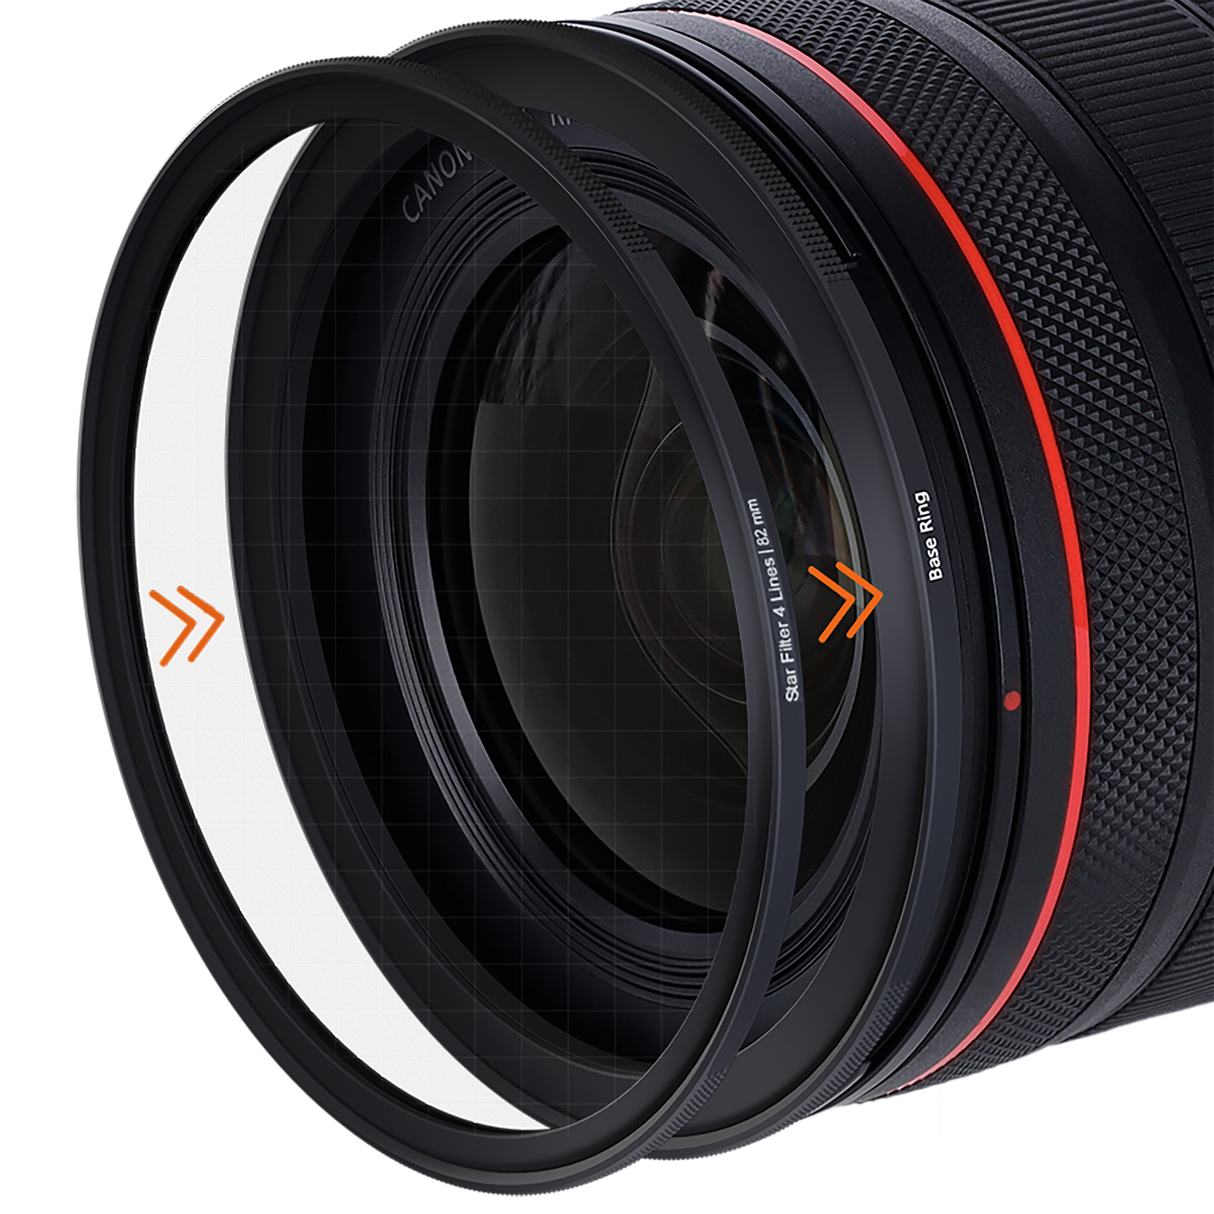 F: x Pro magnetic round filter Mark II 82 mm - star filter 4